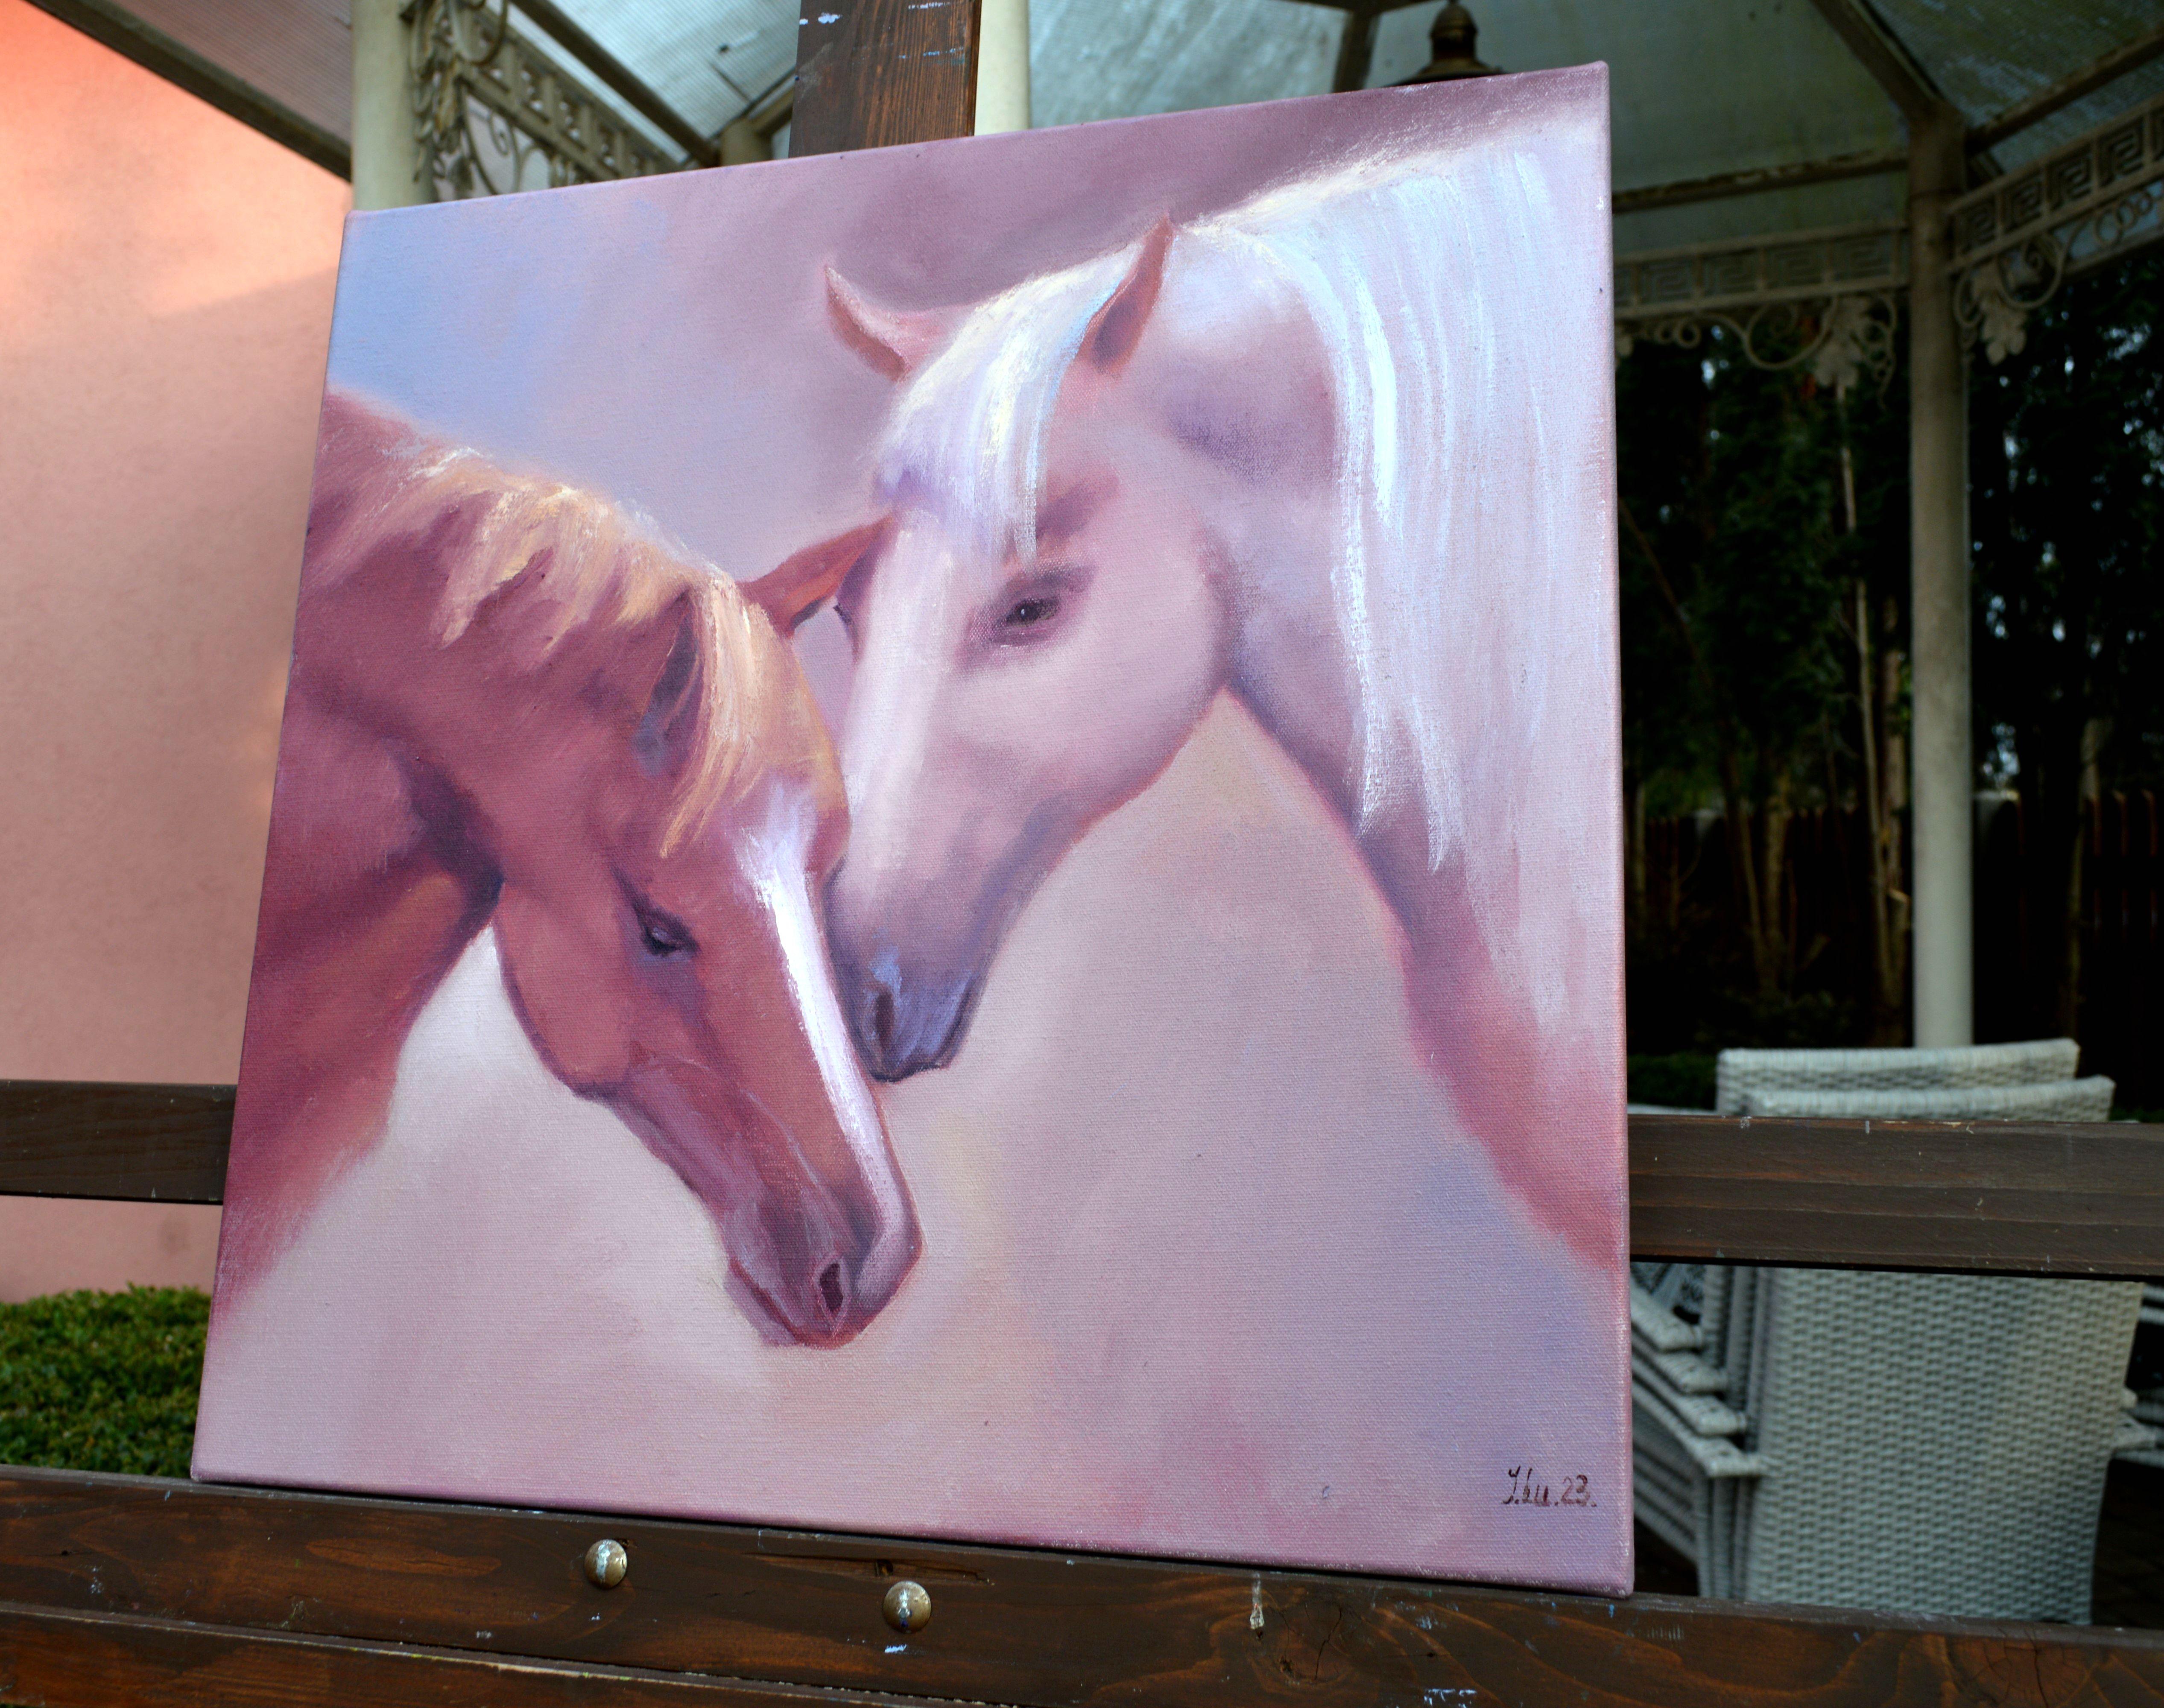 In this oil painting, I poured my soul into capturing the intimate moment between these majestic beings. The language of their gentle nuzzle transcends words, speaking to the universal need for connection. My brushstrokes, rich with emotion, blur